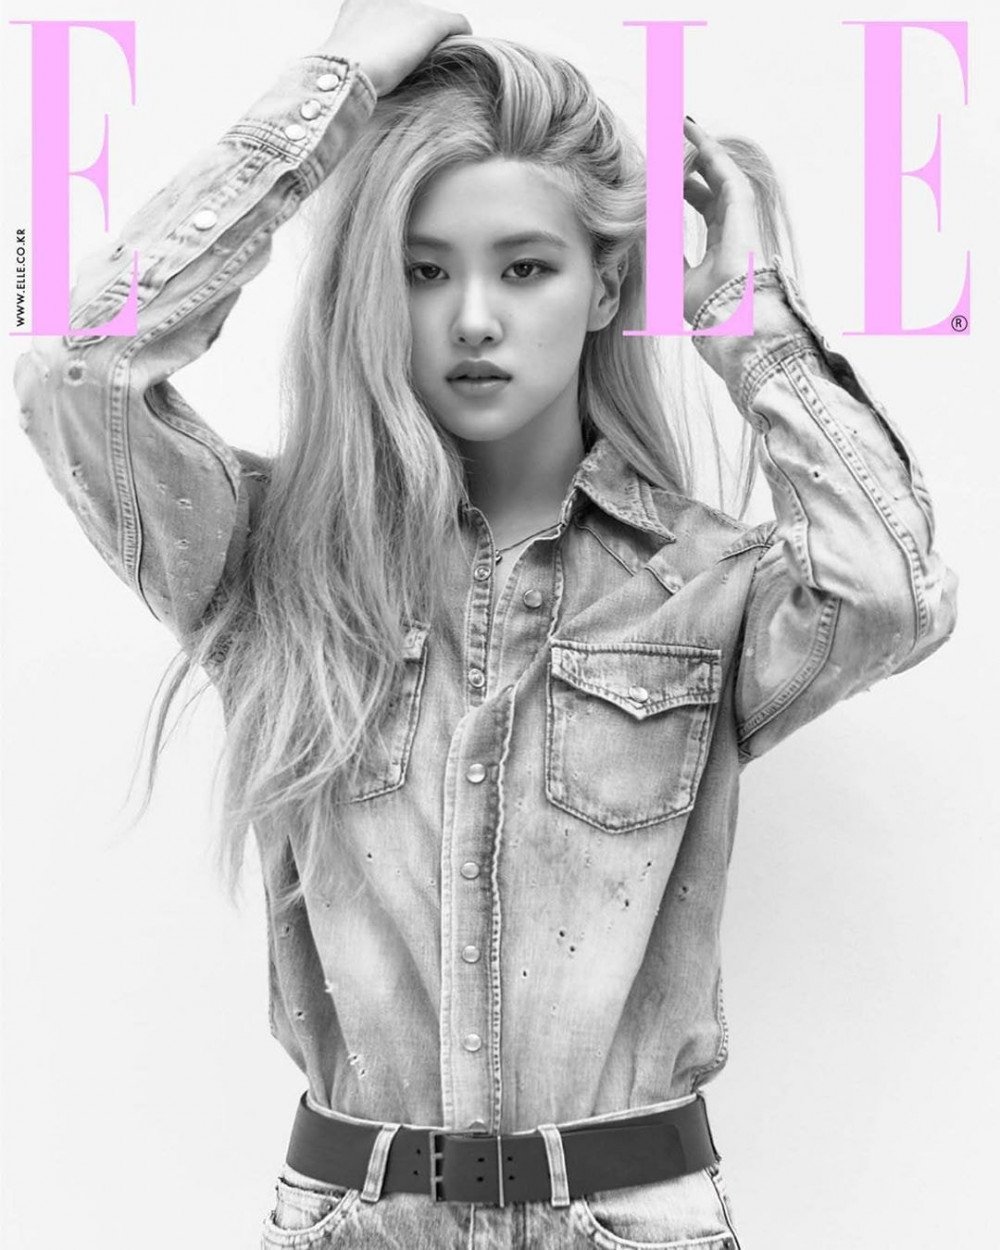 blackpink-rose-interests-fans-by-her-charm-as-the-model-on-the-july-cover-of-elle-2